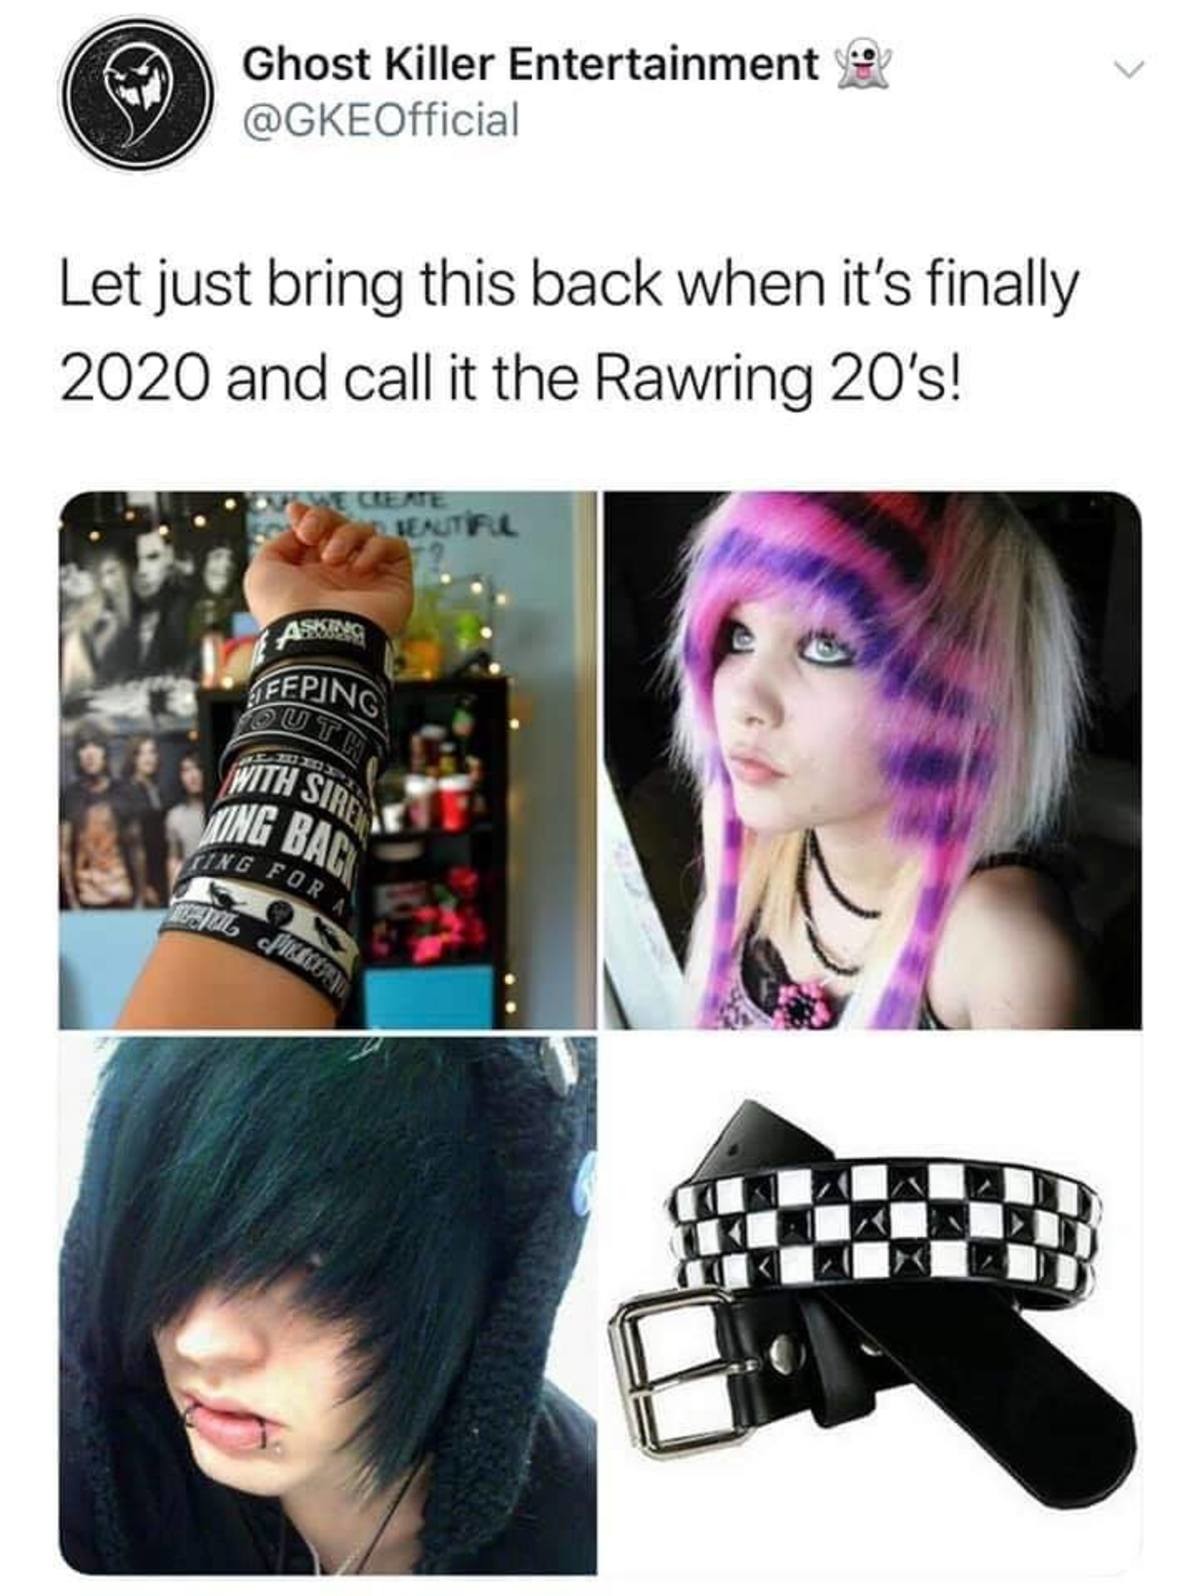 How about no.. .. Those emo chicks always gave the best head. Horrible music taste though